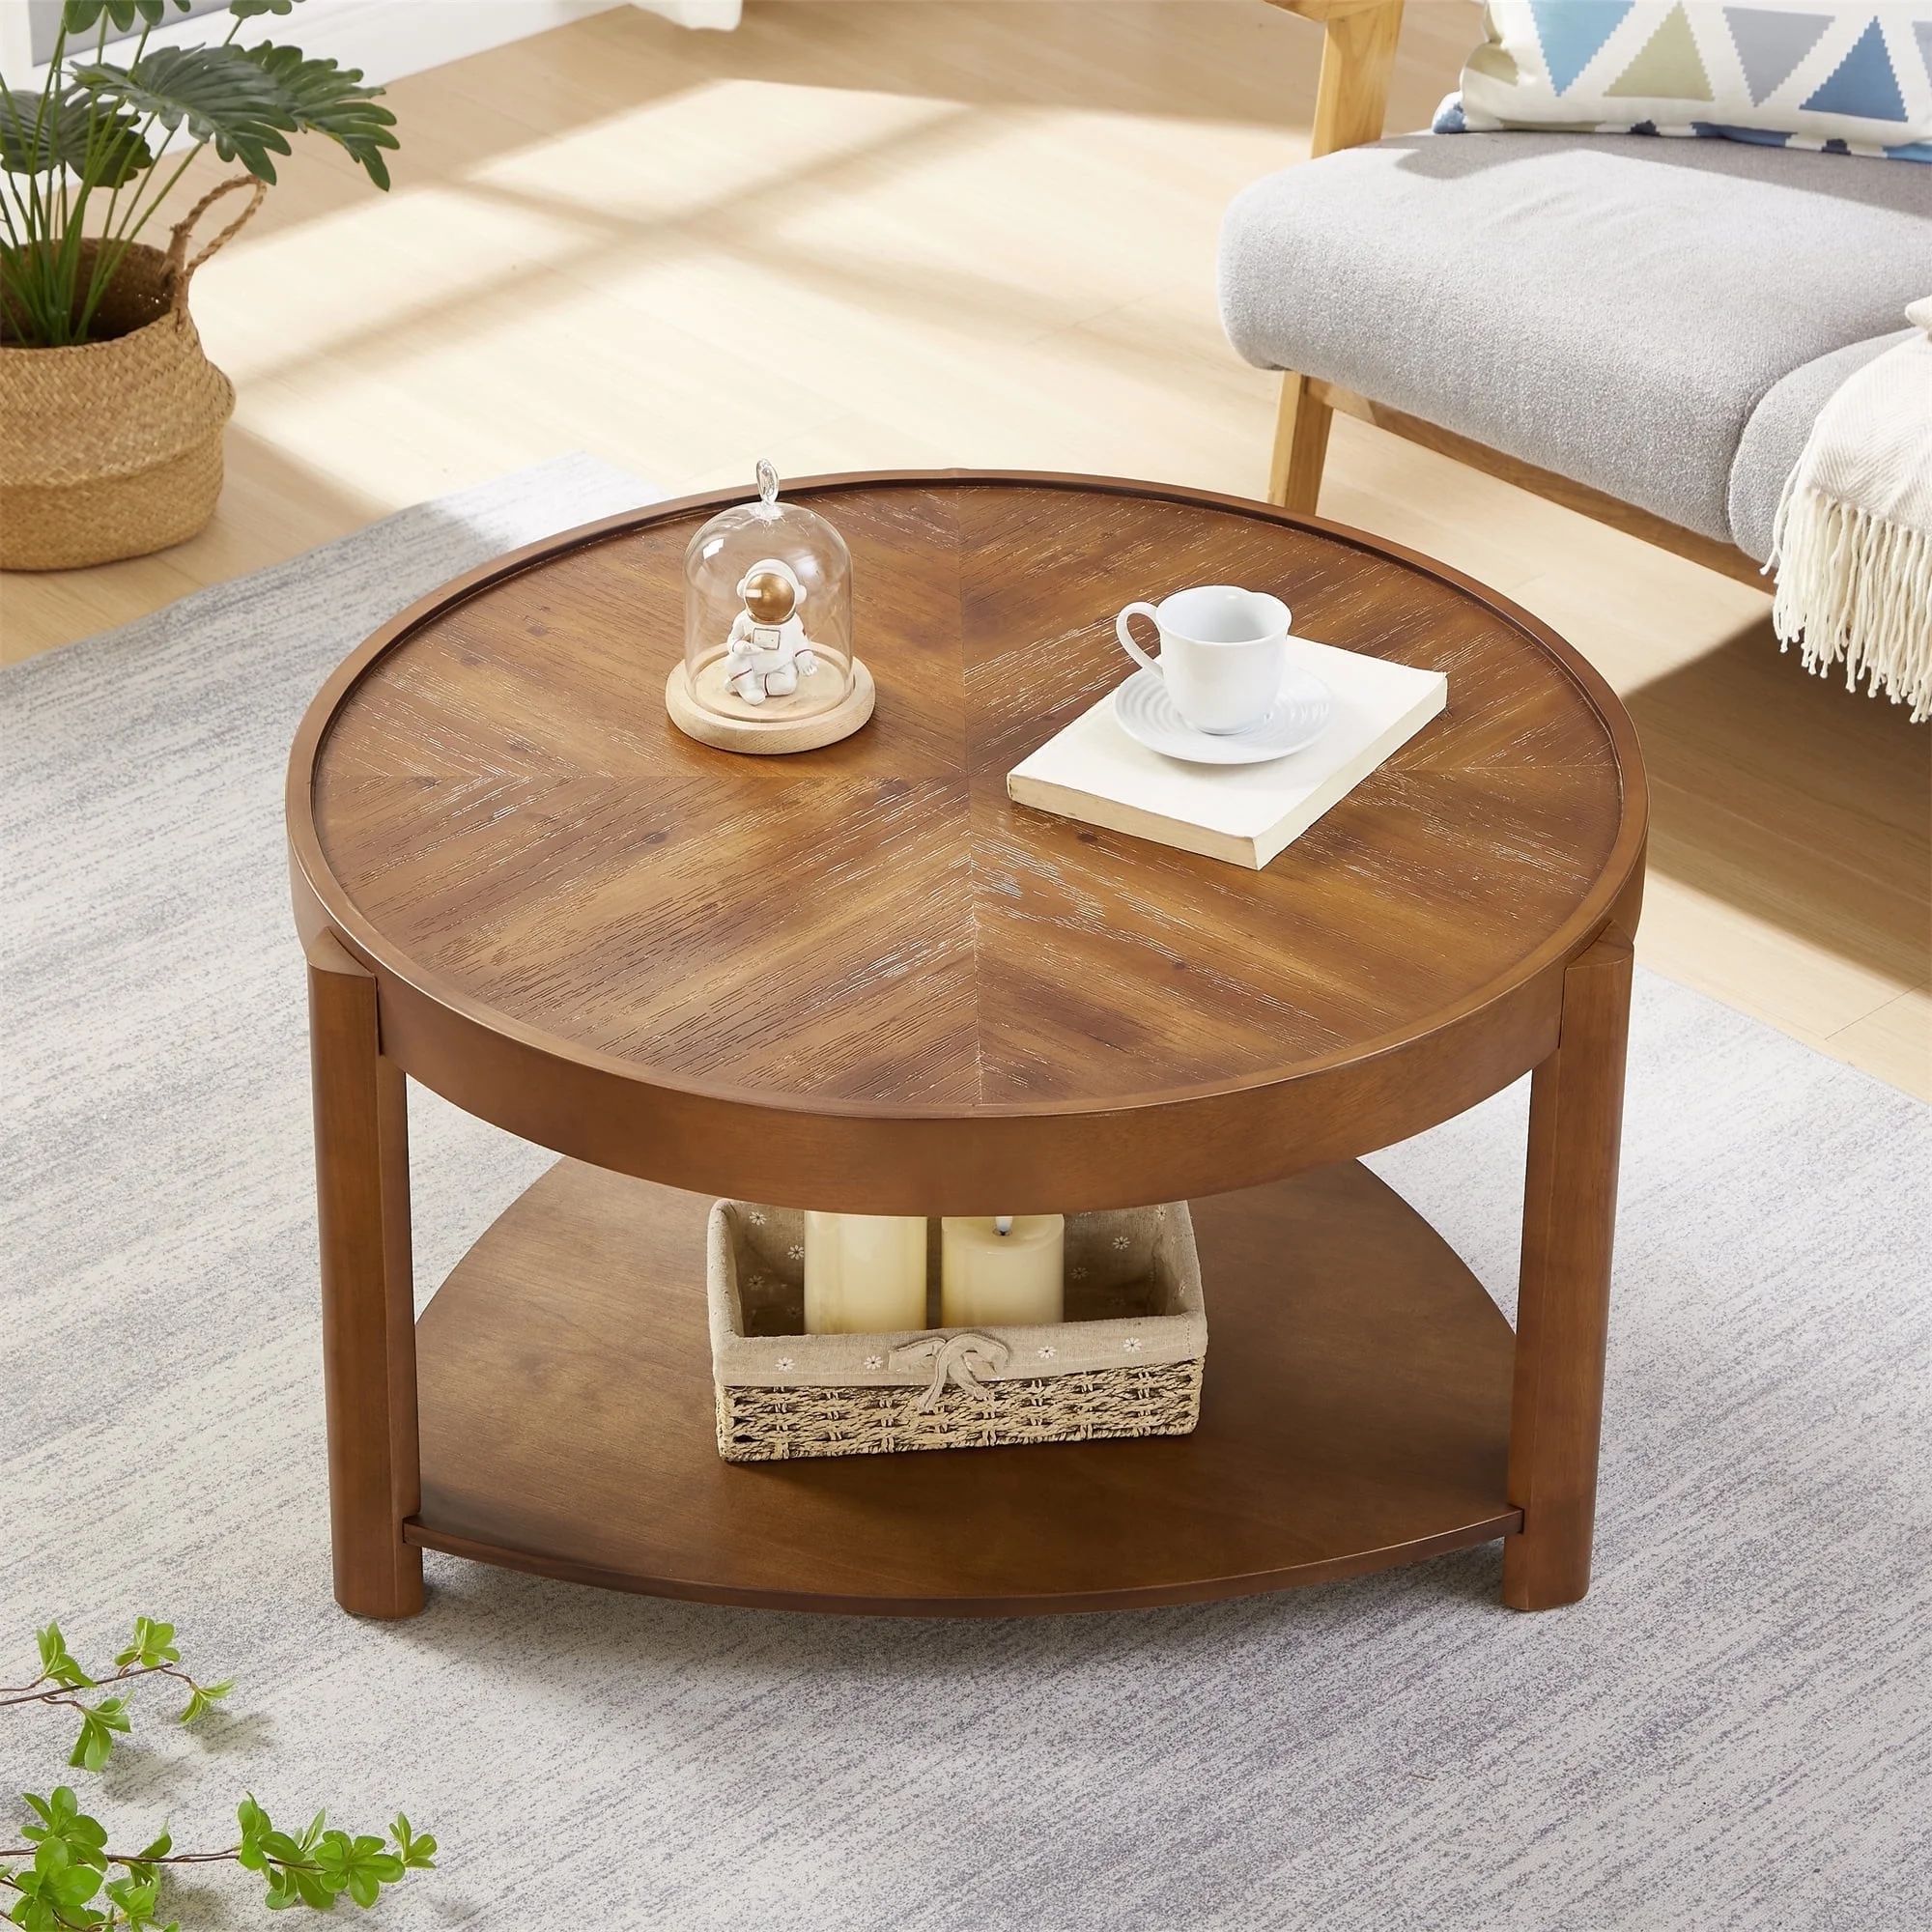 Gexpusm 32" Round Coffee Table, 2-Tier Wood Coffee Table with Storage Shelf for Living Room Bedro... | Walmart (US)